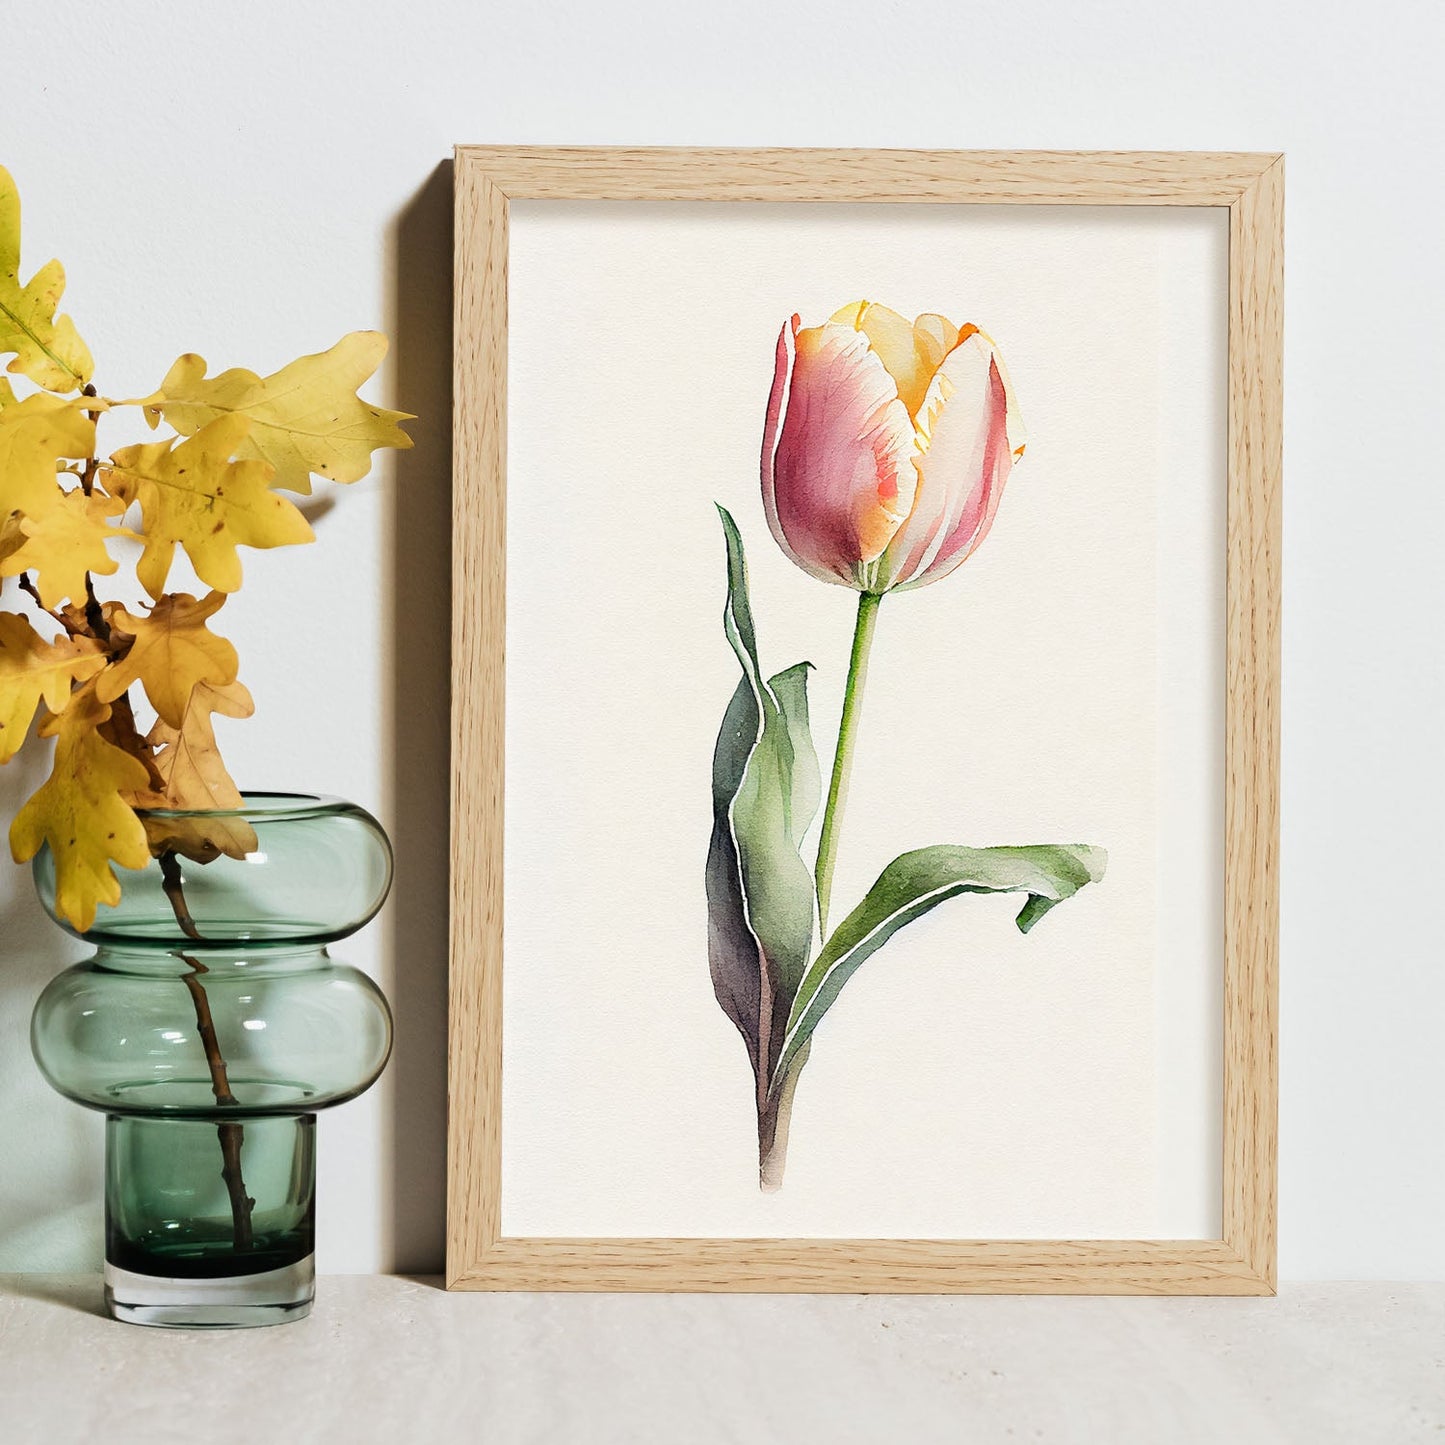 Nacnic watercolor minmal Tulip_5. Aesthetic Wall Art Prints for Bedroom or Living Room Design.